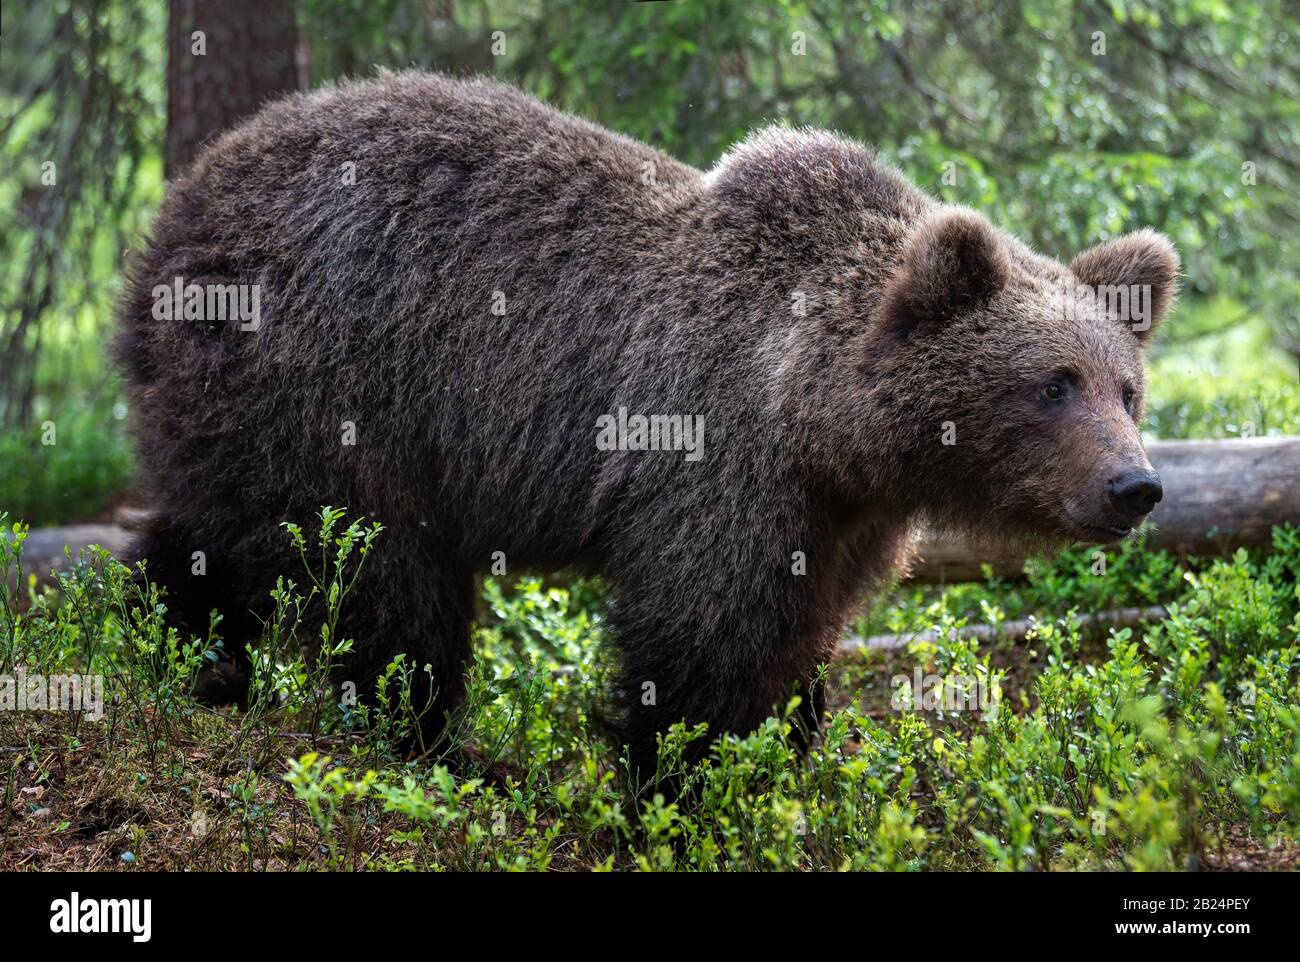 Brown bear in the summer forest. Close up portrait, green natural background. Scientific name: Ursus arctos. Natural habitat. Stock Photo